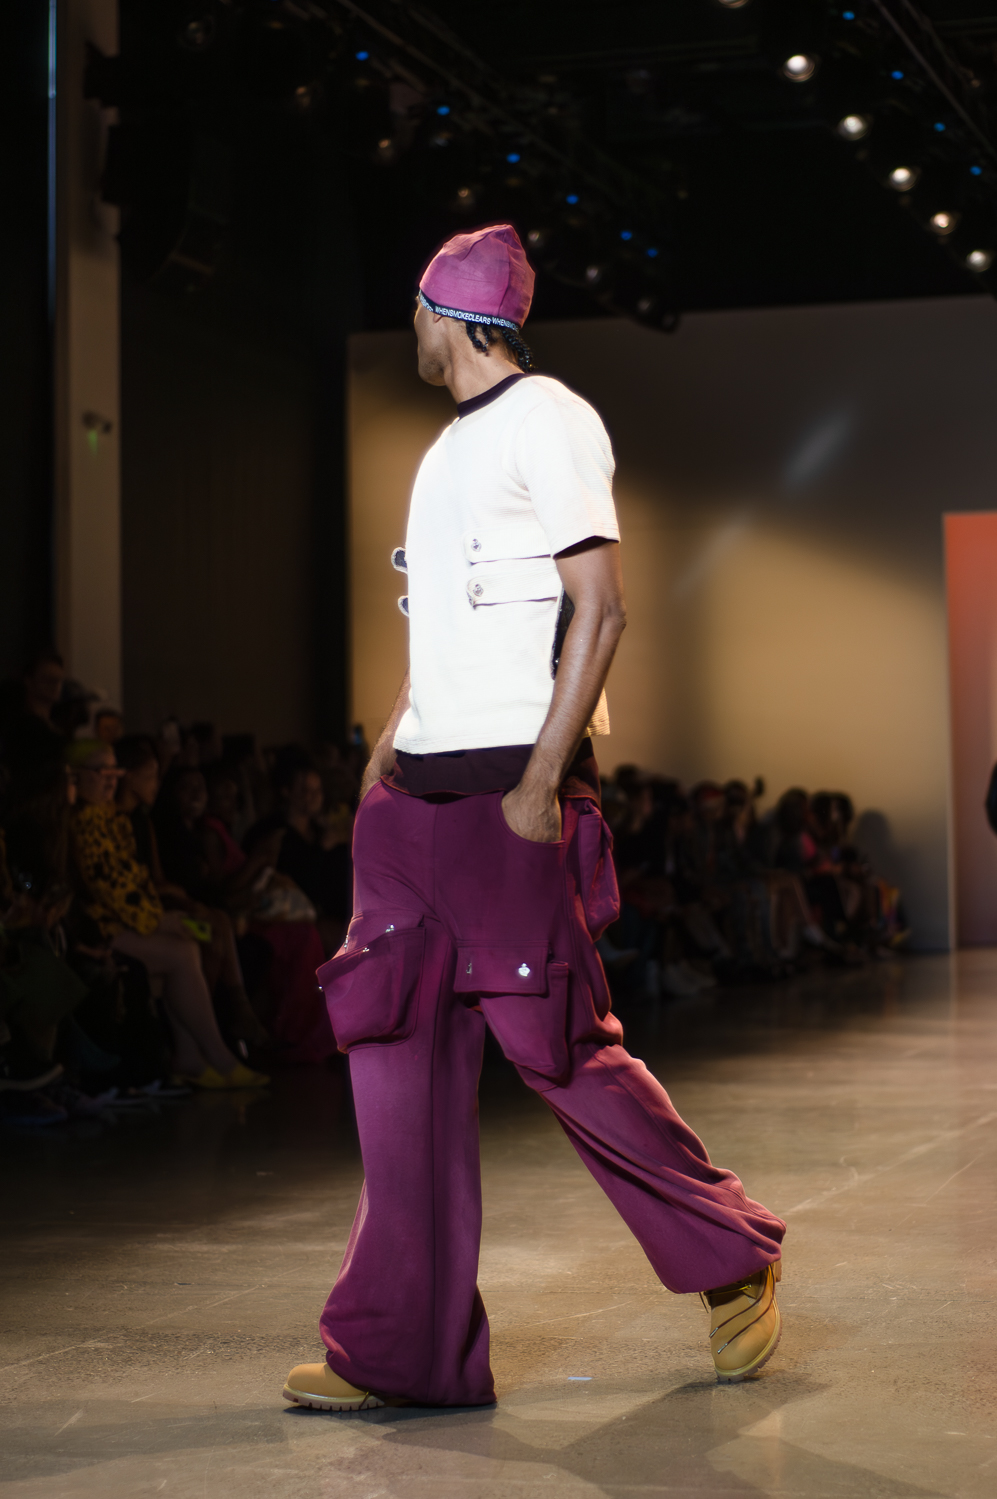 A model wearing a white shirt with two straps on each side of the model’s chest, with a purple shirt underneath, turns to the right on a runway. The model wears baggy purple pants with a large pocket on each leg, and brown lace-up boots. The model wears a pink head covering, and holds both hands in the pants’ pockets.